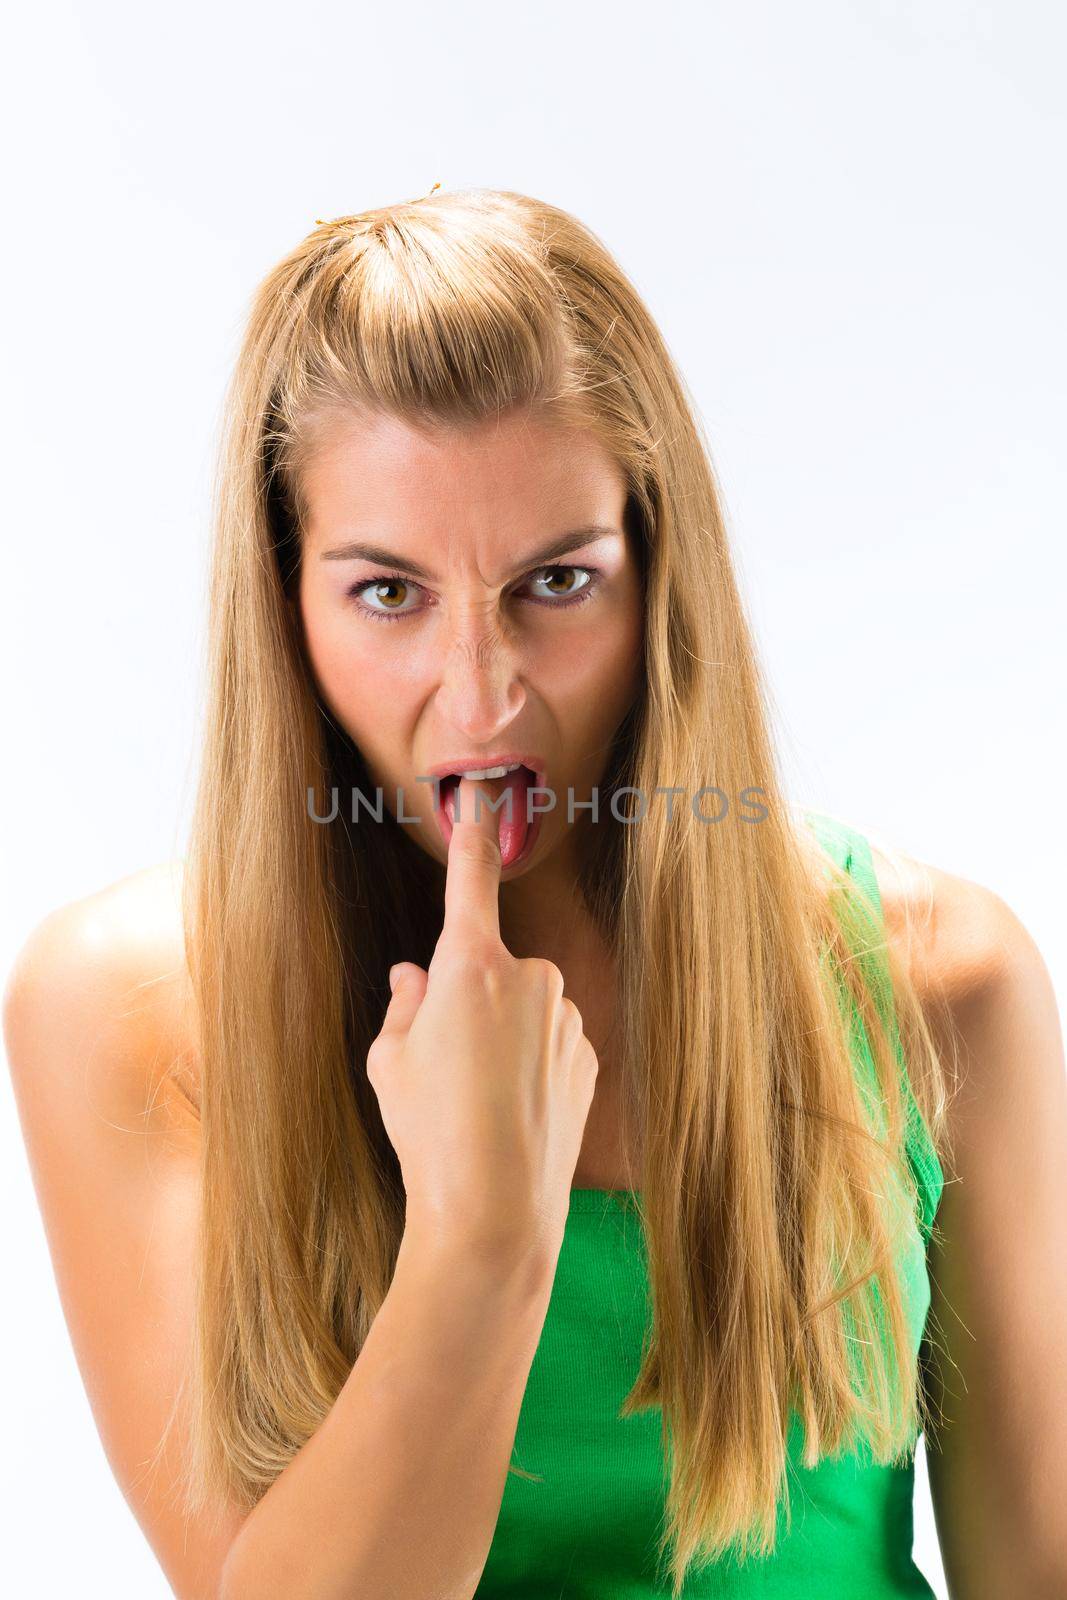 Portrait of young woman with finger on her tongue against white background